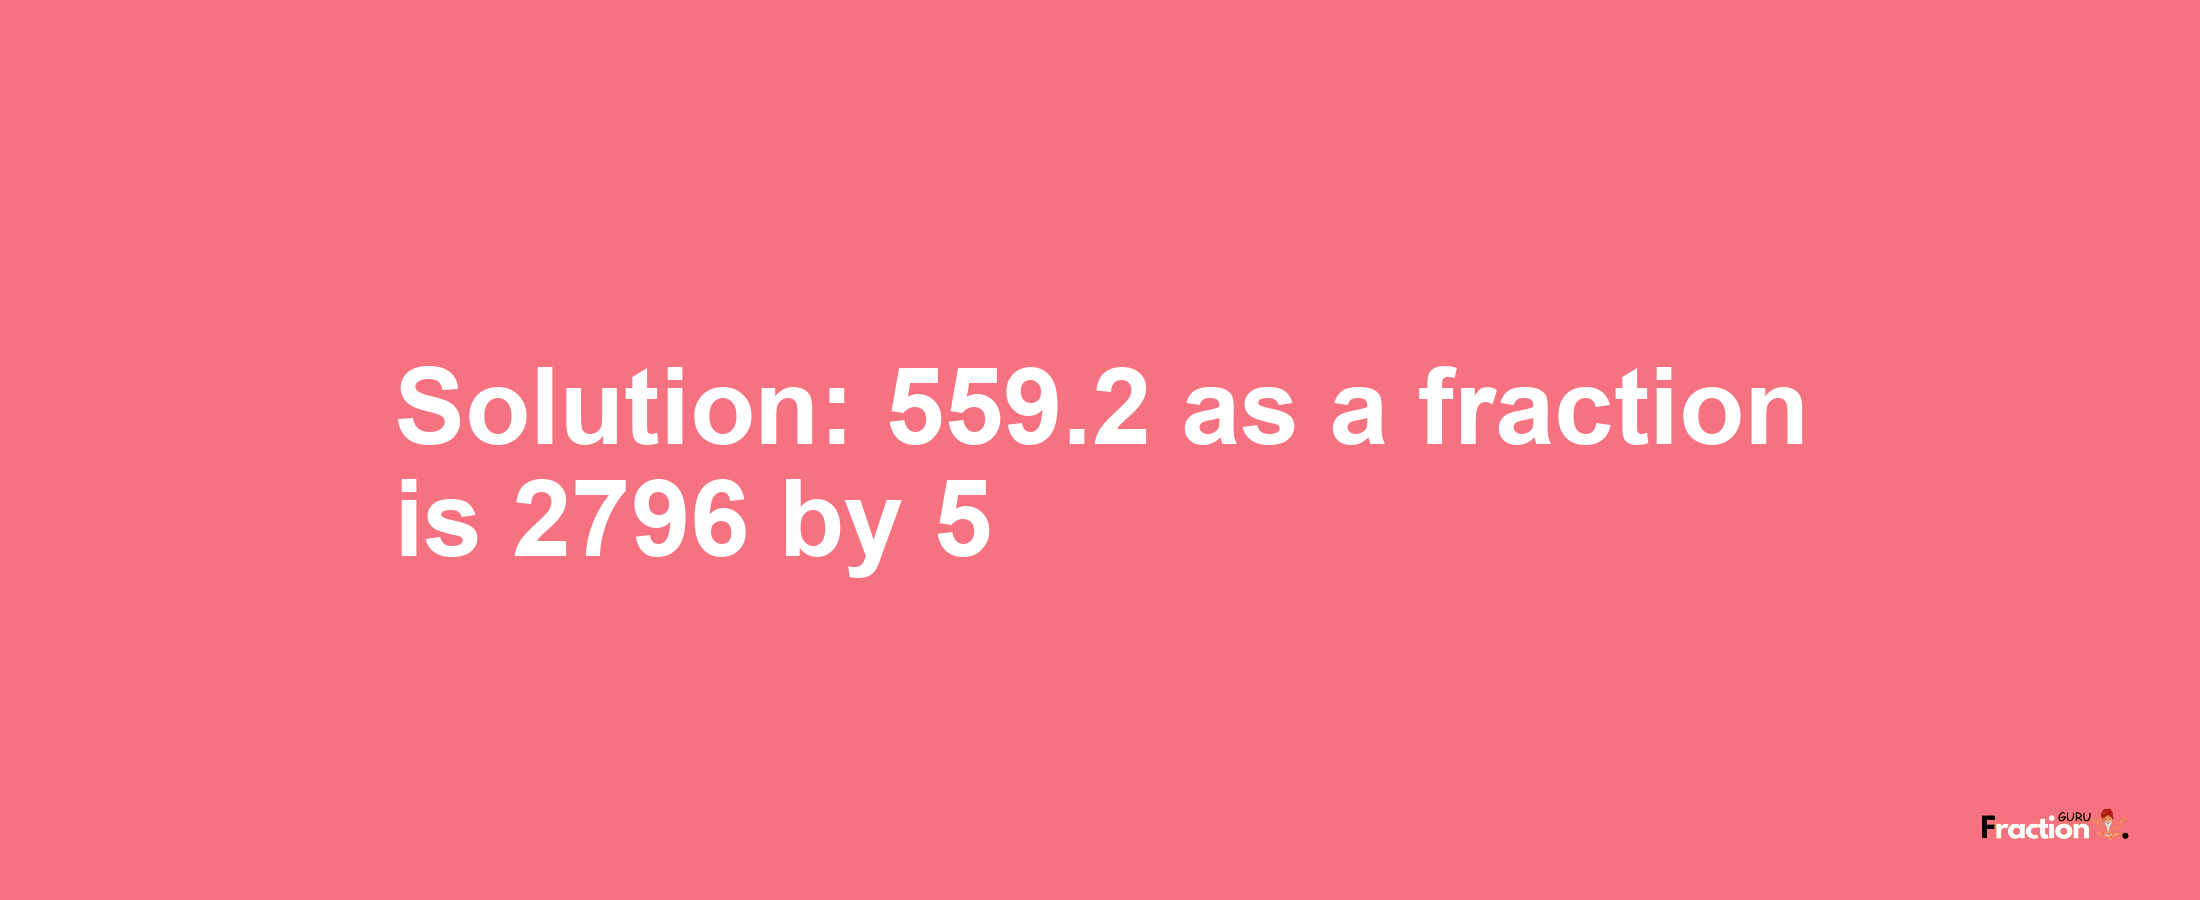 Solution:559.2 as a fraction is 2796/5